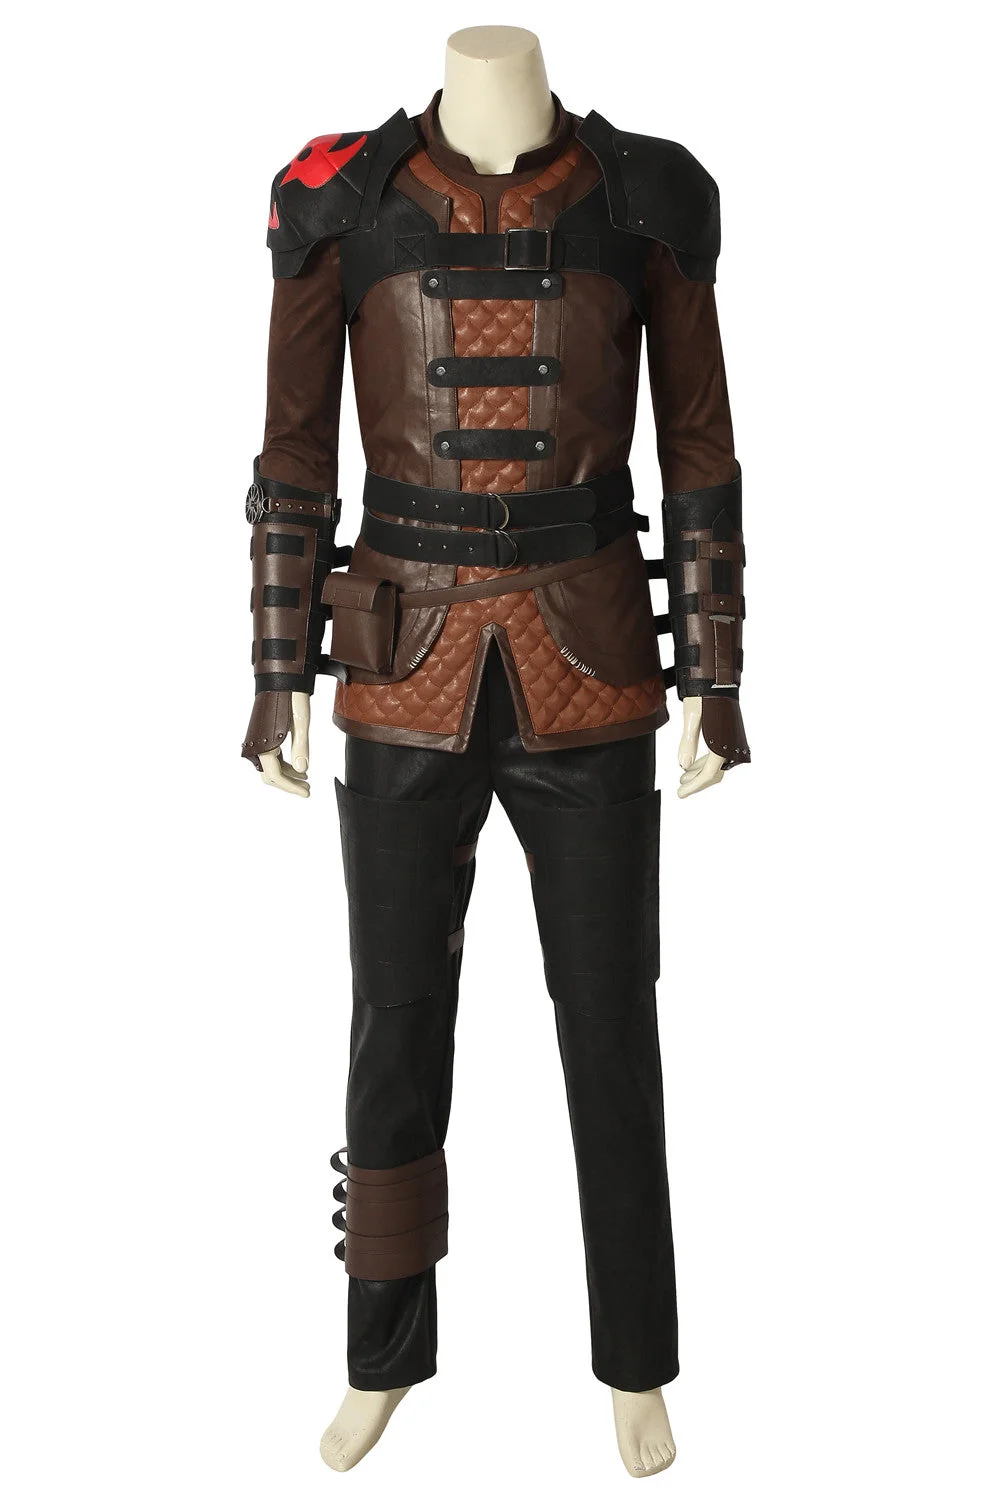 Hiccup Cosplay Costume How To Train Your Dragon 3 Suit